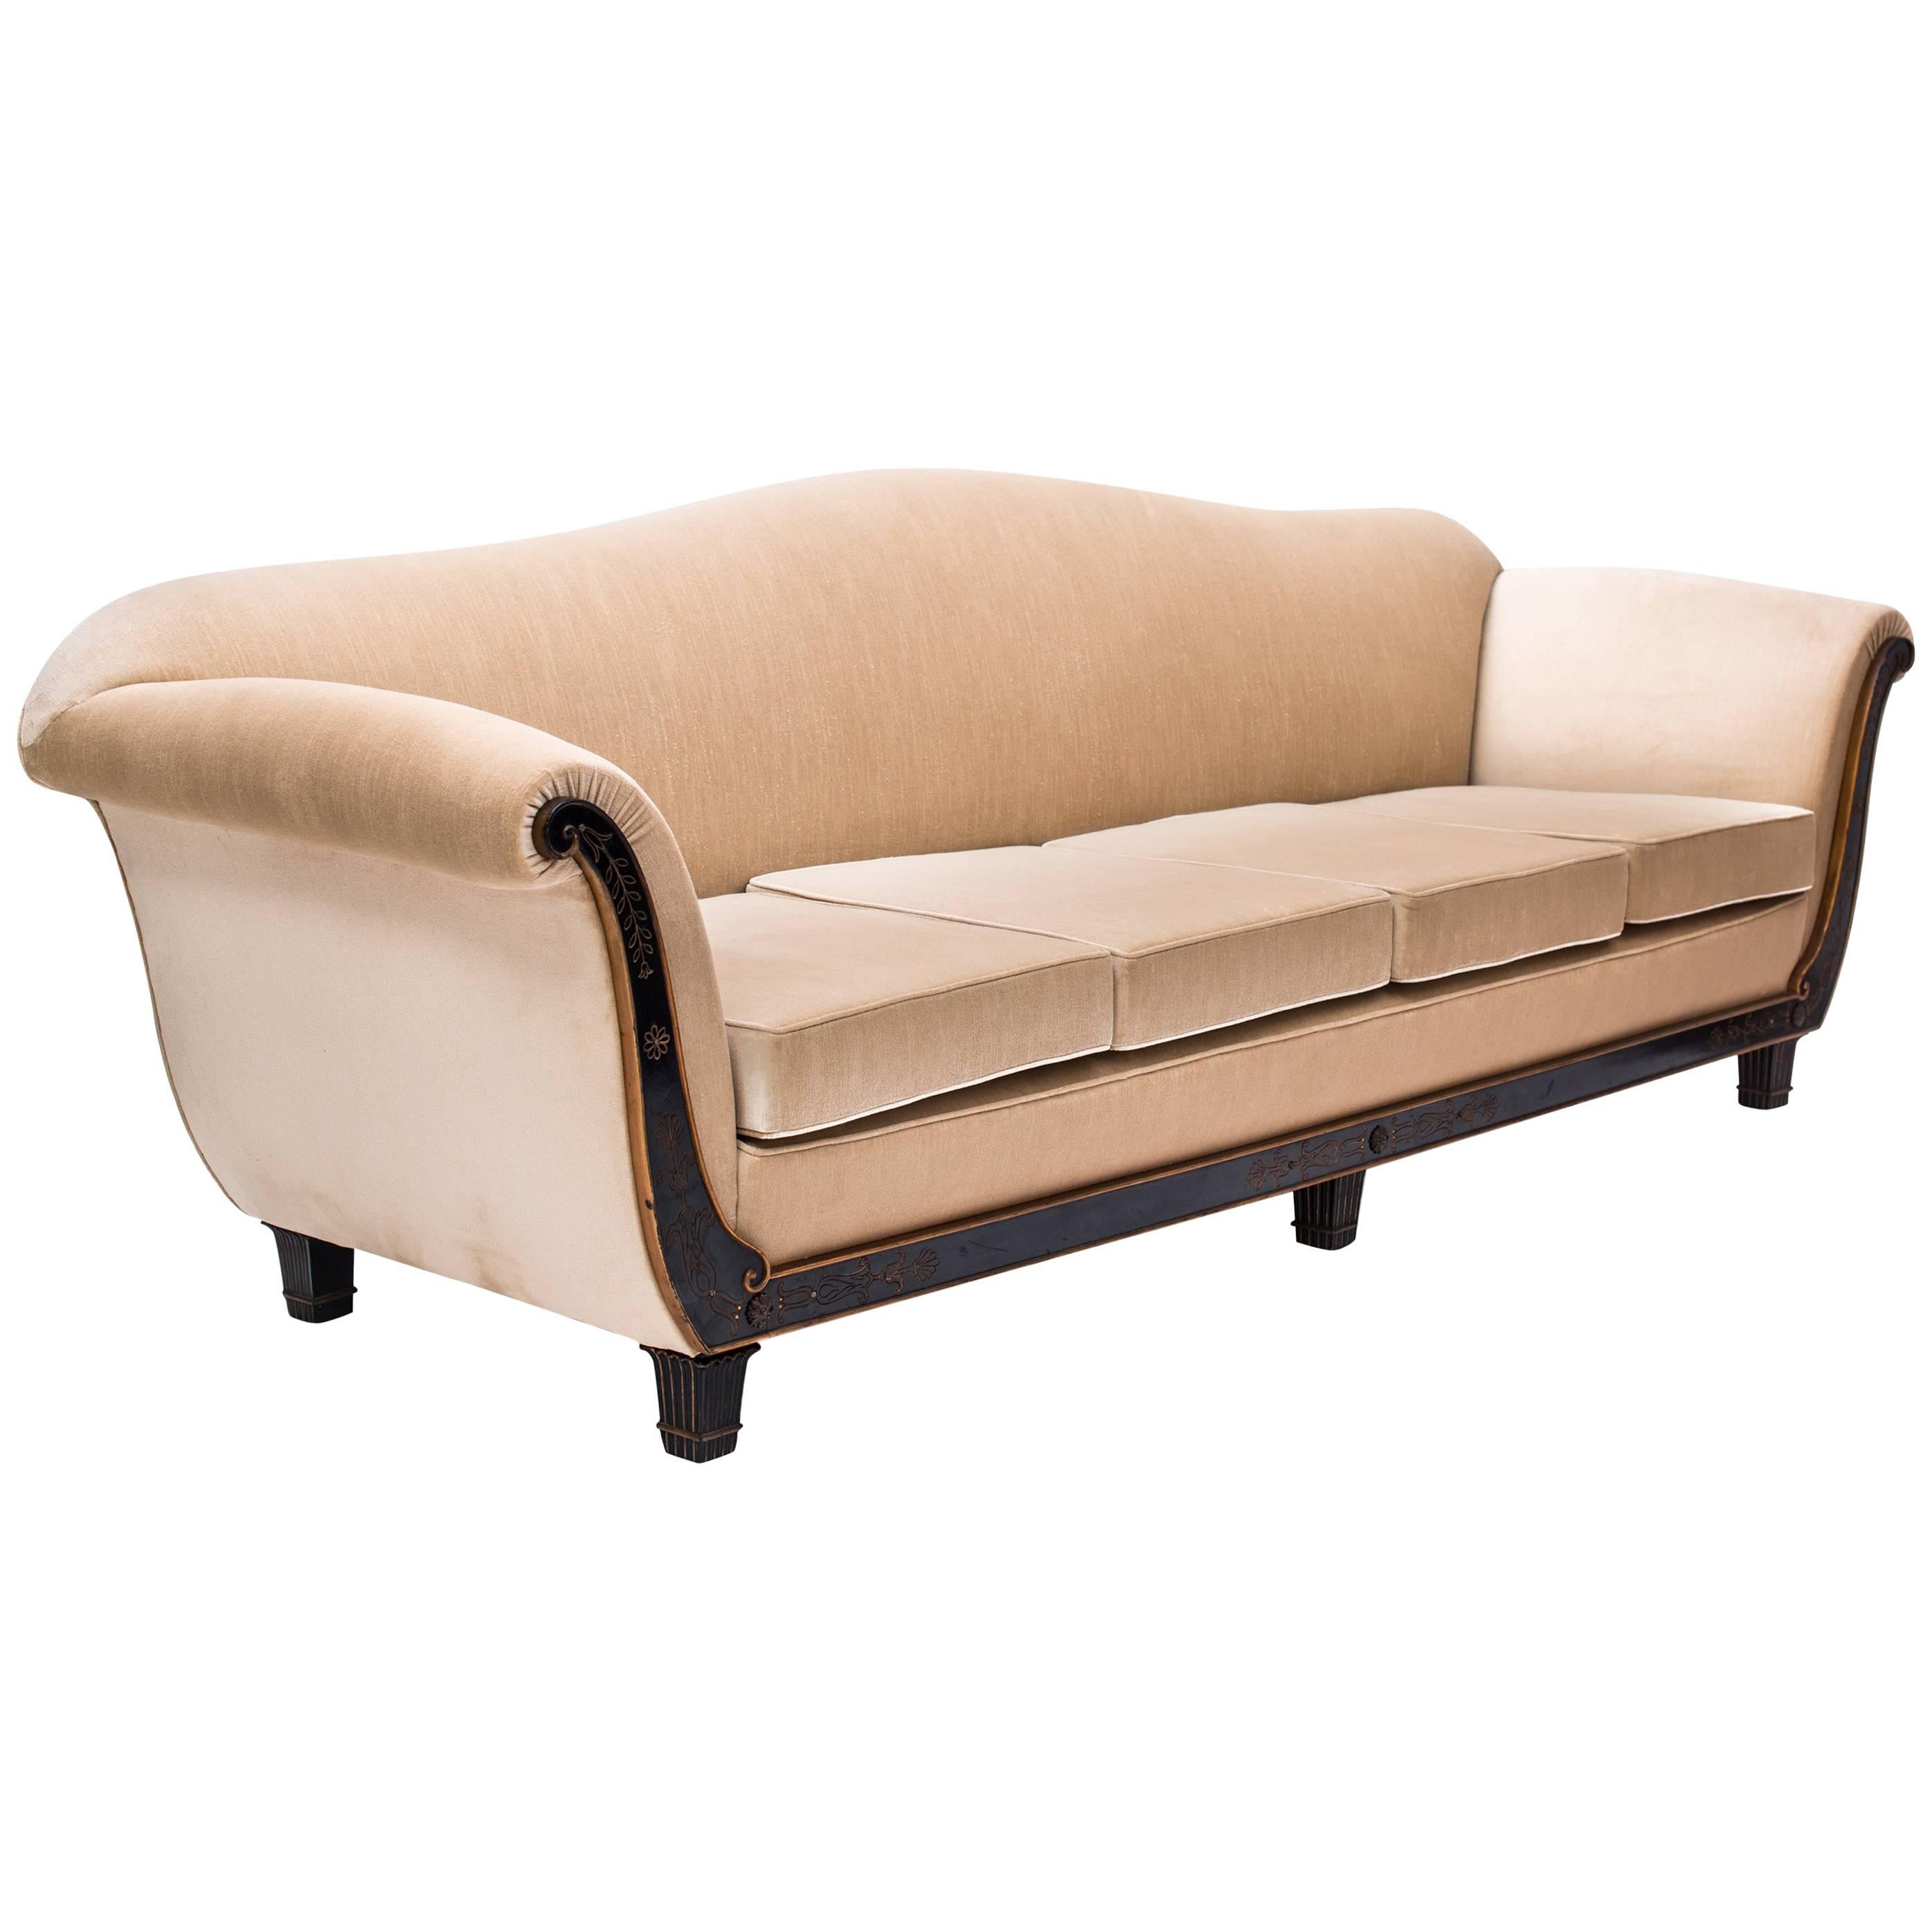 Salvatore Dinucci Midcentury Brazilian Sofa with Velvet Upholstery, 1950s For Sale